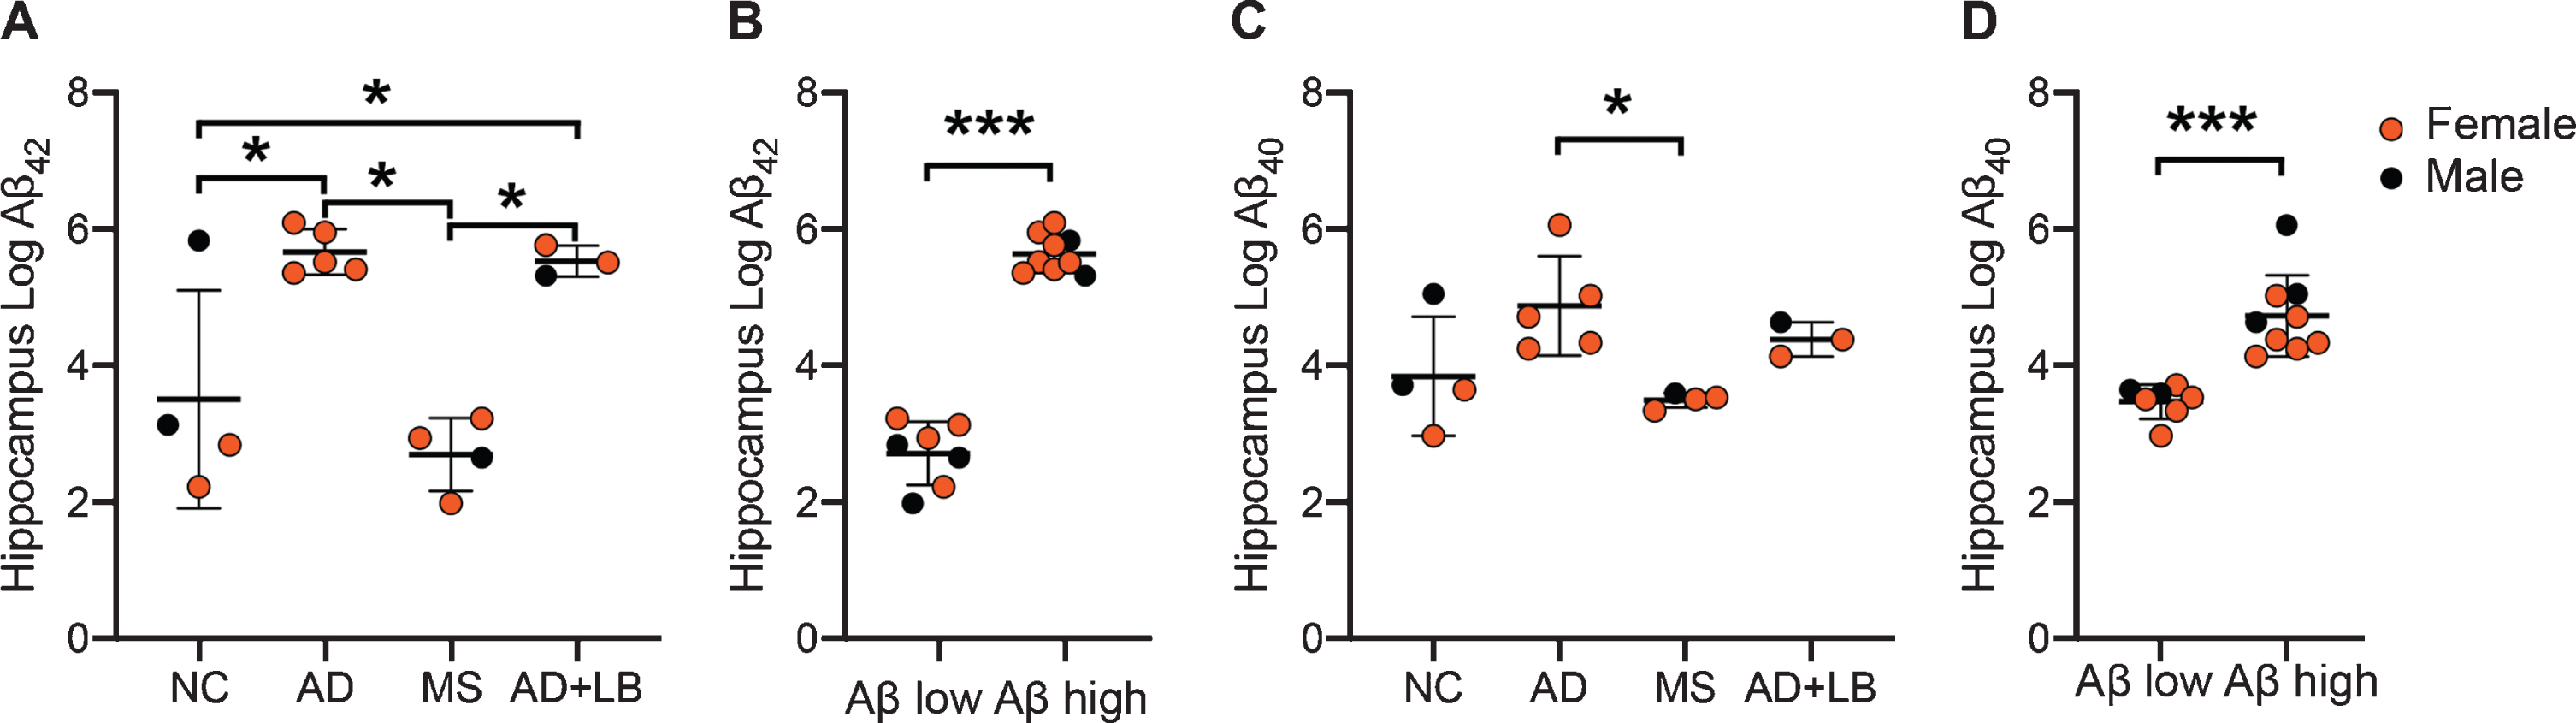 Levels of Aβ42-HMW and Aβ40-HMW in hippocampus of individuals included in the study. Image in (A) shows a column scatter graph demonstrating higher log Aβ42-HMW in patients with Alzheimer’s disease (AD) and Alzheimer’s disease with Lewy bodies (AD+LB) compared to both non-demented controls (NC) and to patients with multiple sclerosis (MS). Image in (B) shows a column scatter graph demonstrating higher log Aβ42-HMW in individuals with high Aβ scores (C) compared to individuals with low Aβ scores (O or A). Image in (C) shows a column scatter graph demonstrating higher log Aβ40-HMW in AD patients compared to patients with MS. Image in (D) shows a column scatter graph demonstrating higher log Aβ40-HMW in individuals with high Aβ scores compared to individuals with low Aβ scores. Data is analyzed using ANOVA followed by Tukey HSD (A and C) and student t-test (B and D). Values are presented as mean value±SD. Of note, Aβ42 values from one MS patient were below the detection limit and set to the lowest detected normalized value divided by two before logistic transformation. *Significant correlation at p < 0.05 level. ***Significant correlation at p < 0.001 level.